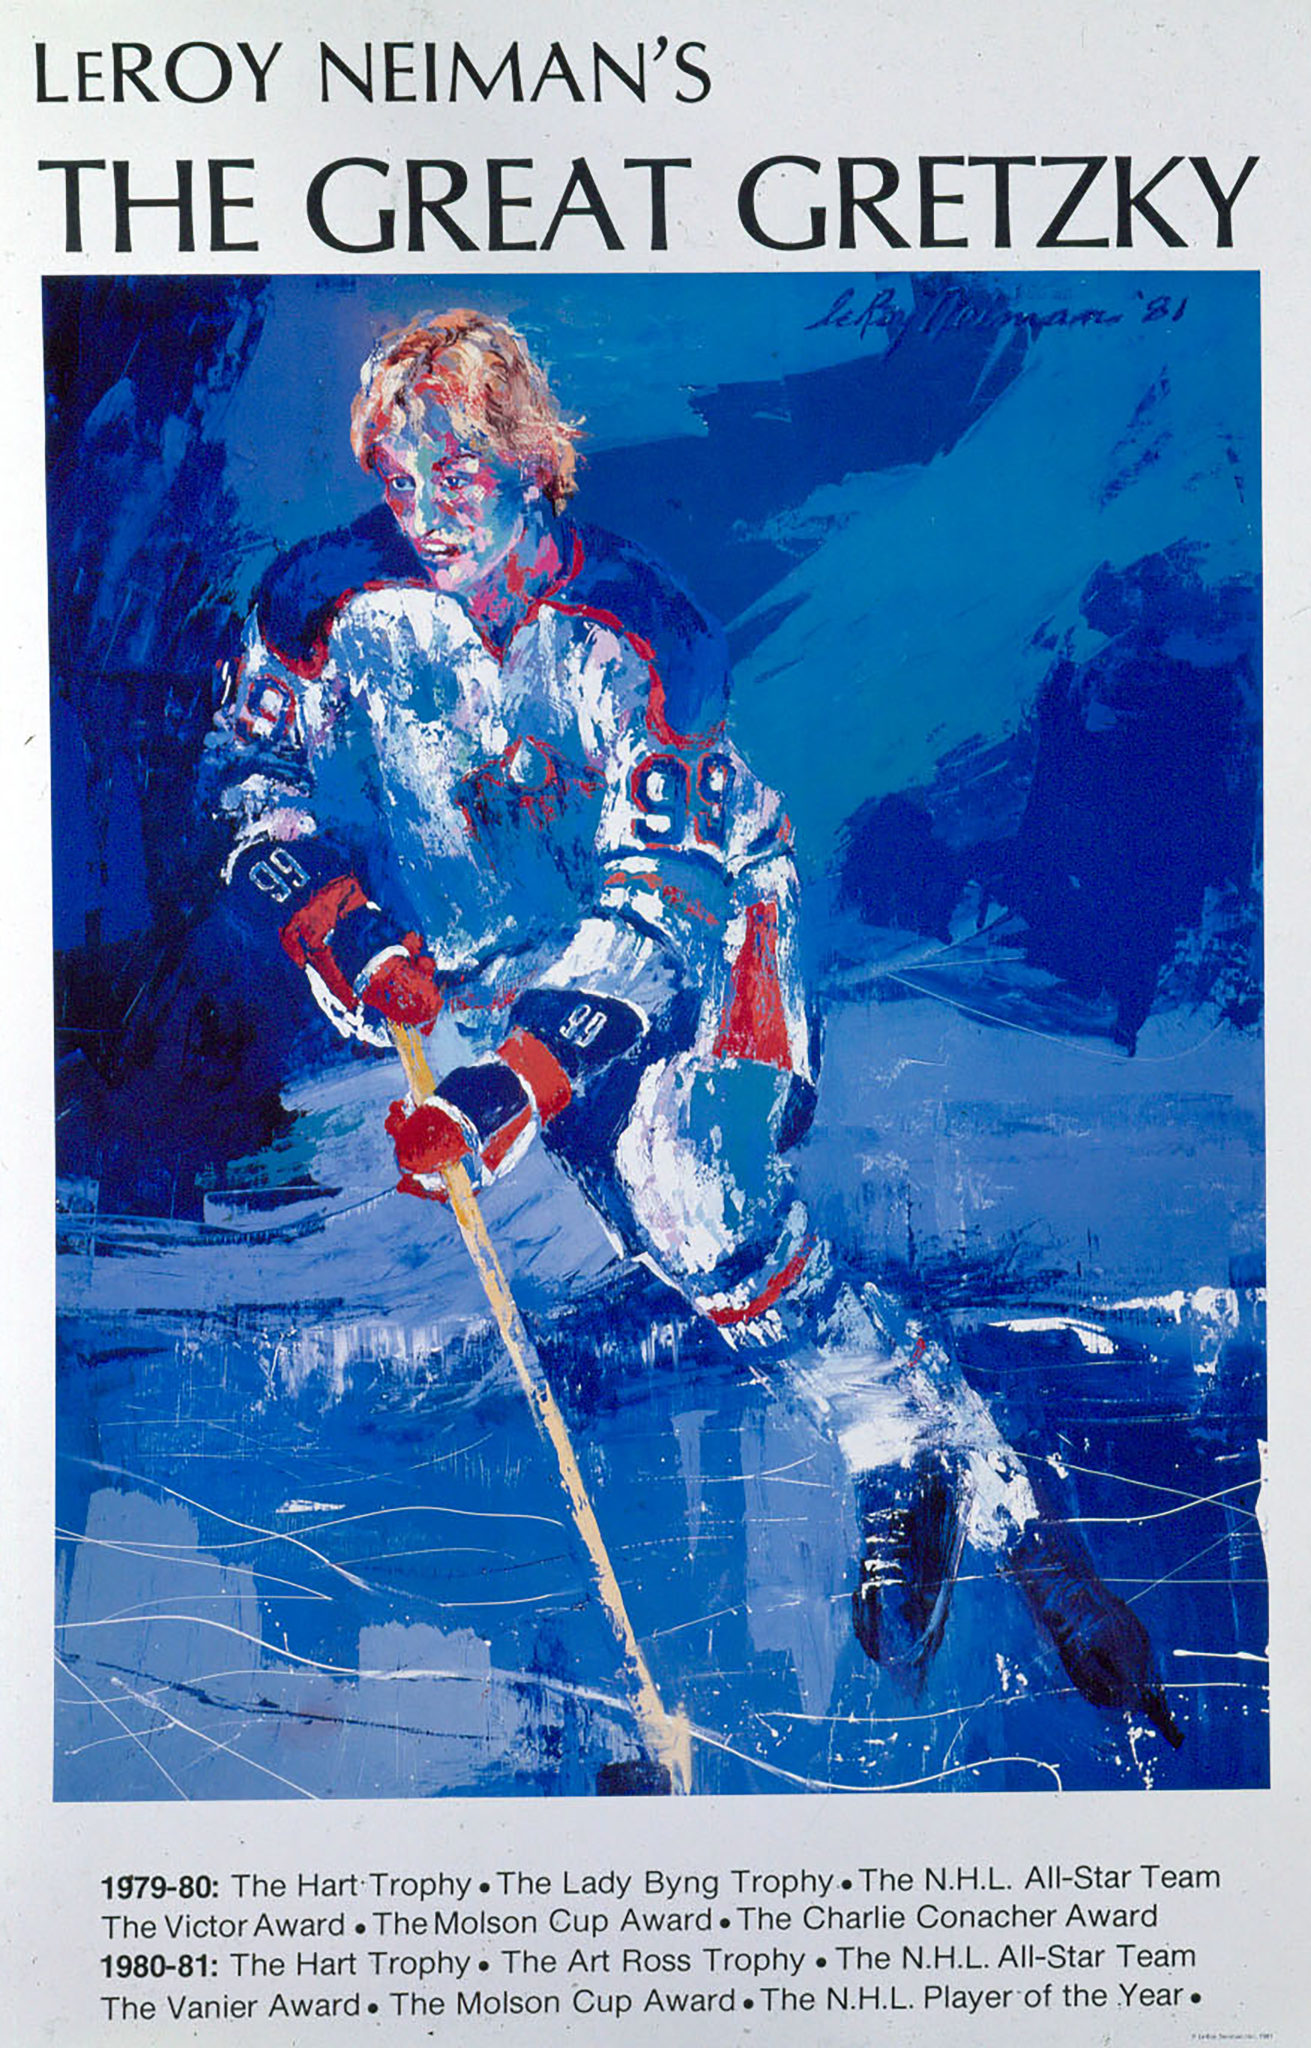 The Great Gretzky poster